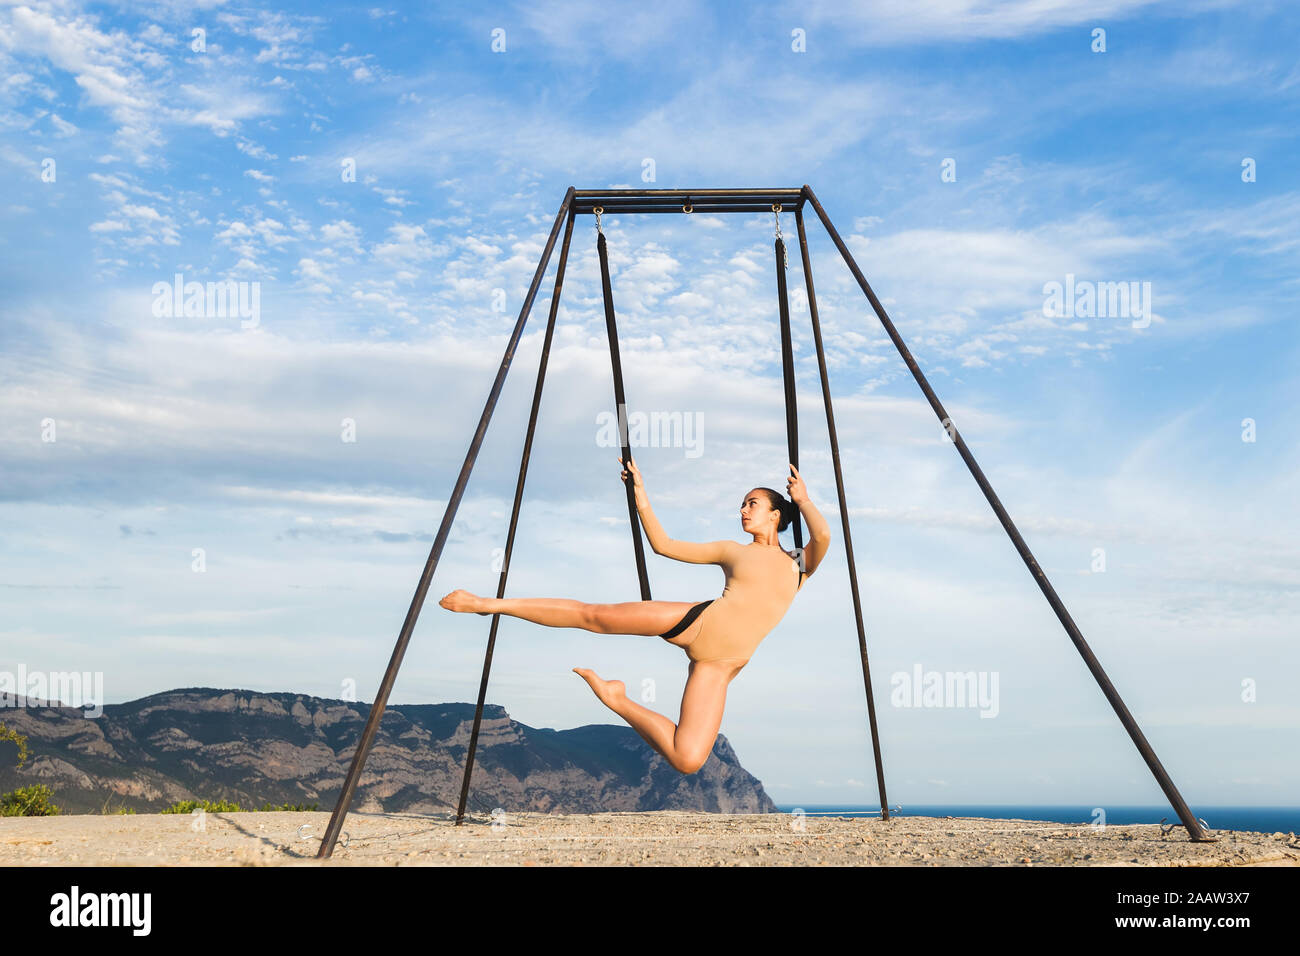 Woman practicing fly dance gravity yoga poses in a hammock outdoors with mountain view. Healthy lifestyle, active woman. Stock Photo